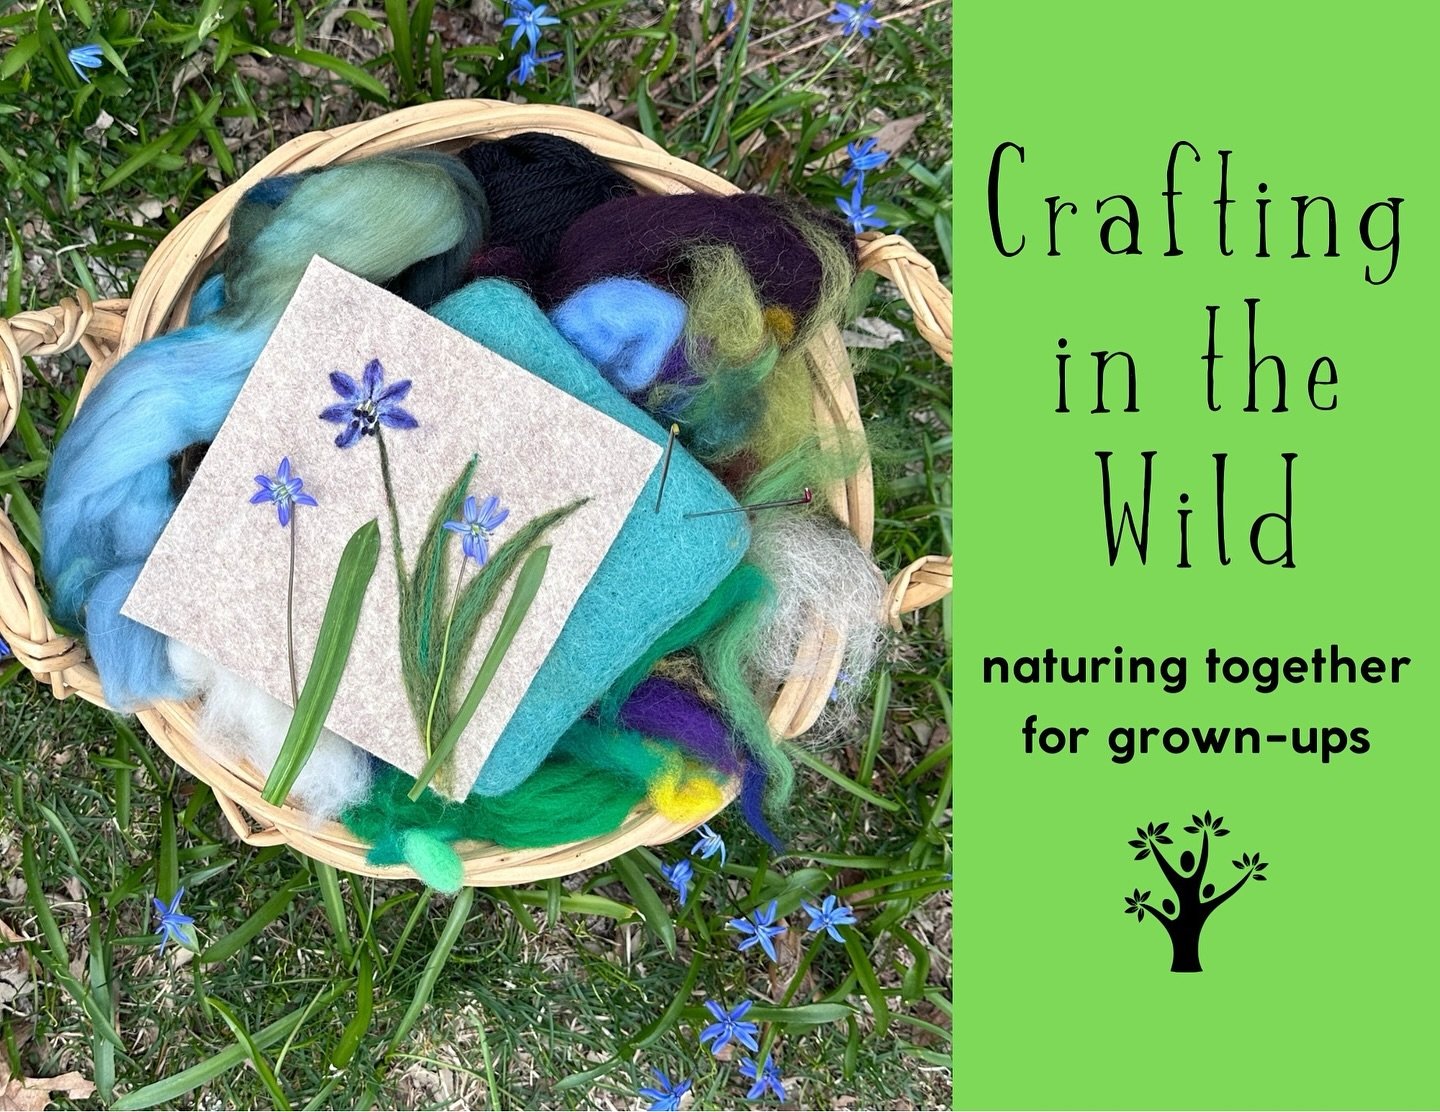 🪻🌼🌸So excited to announce a new program for adults: Crafting in the Wild! I&rsquo;ve been sitting on this idea for years and finally making it happen🙌. Us grown-ups deserve to gather and play in nature together as much as kids do. So come join me